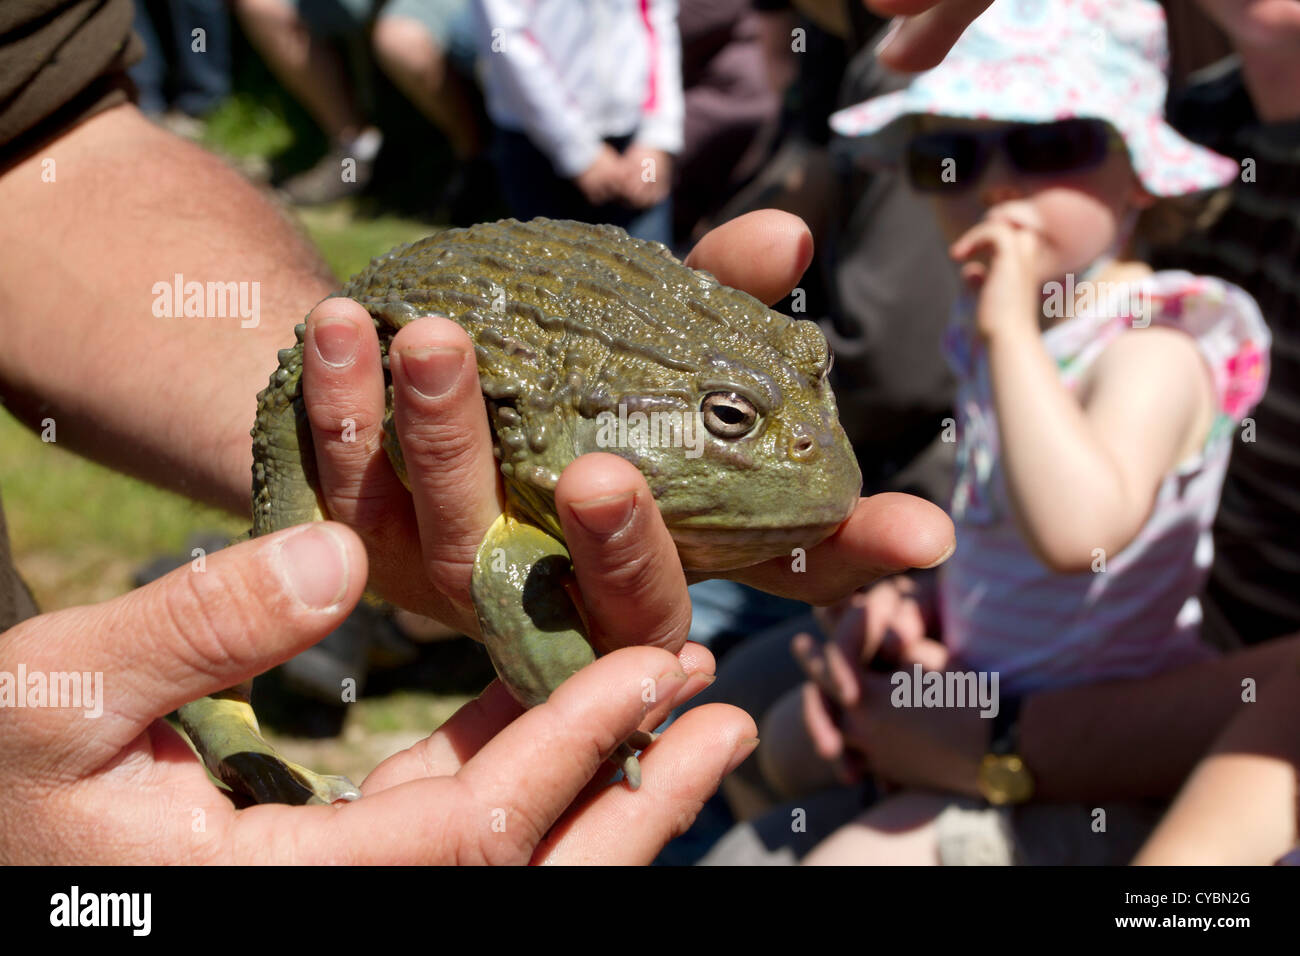 Children interact with a frog at a reptile education event. Stock Photo